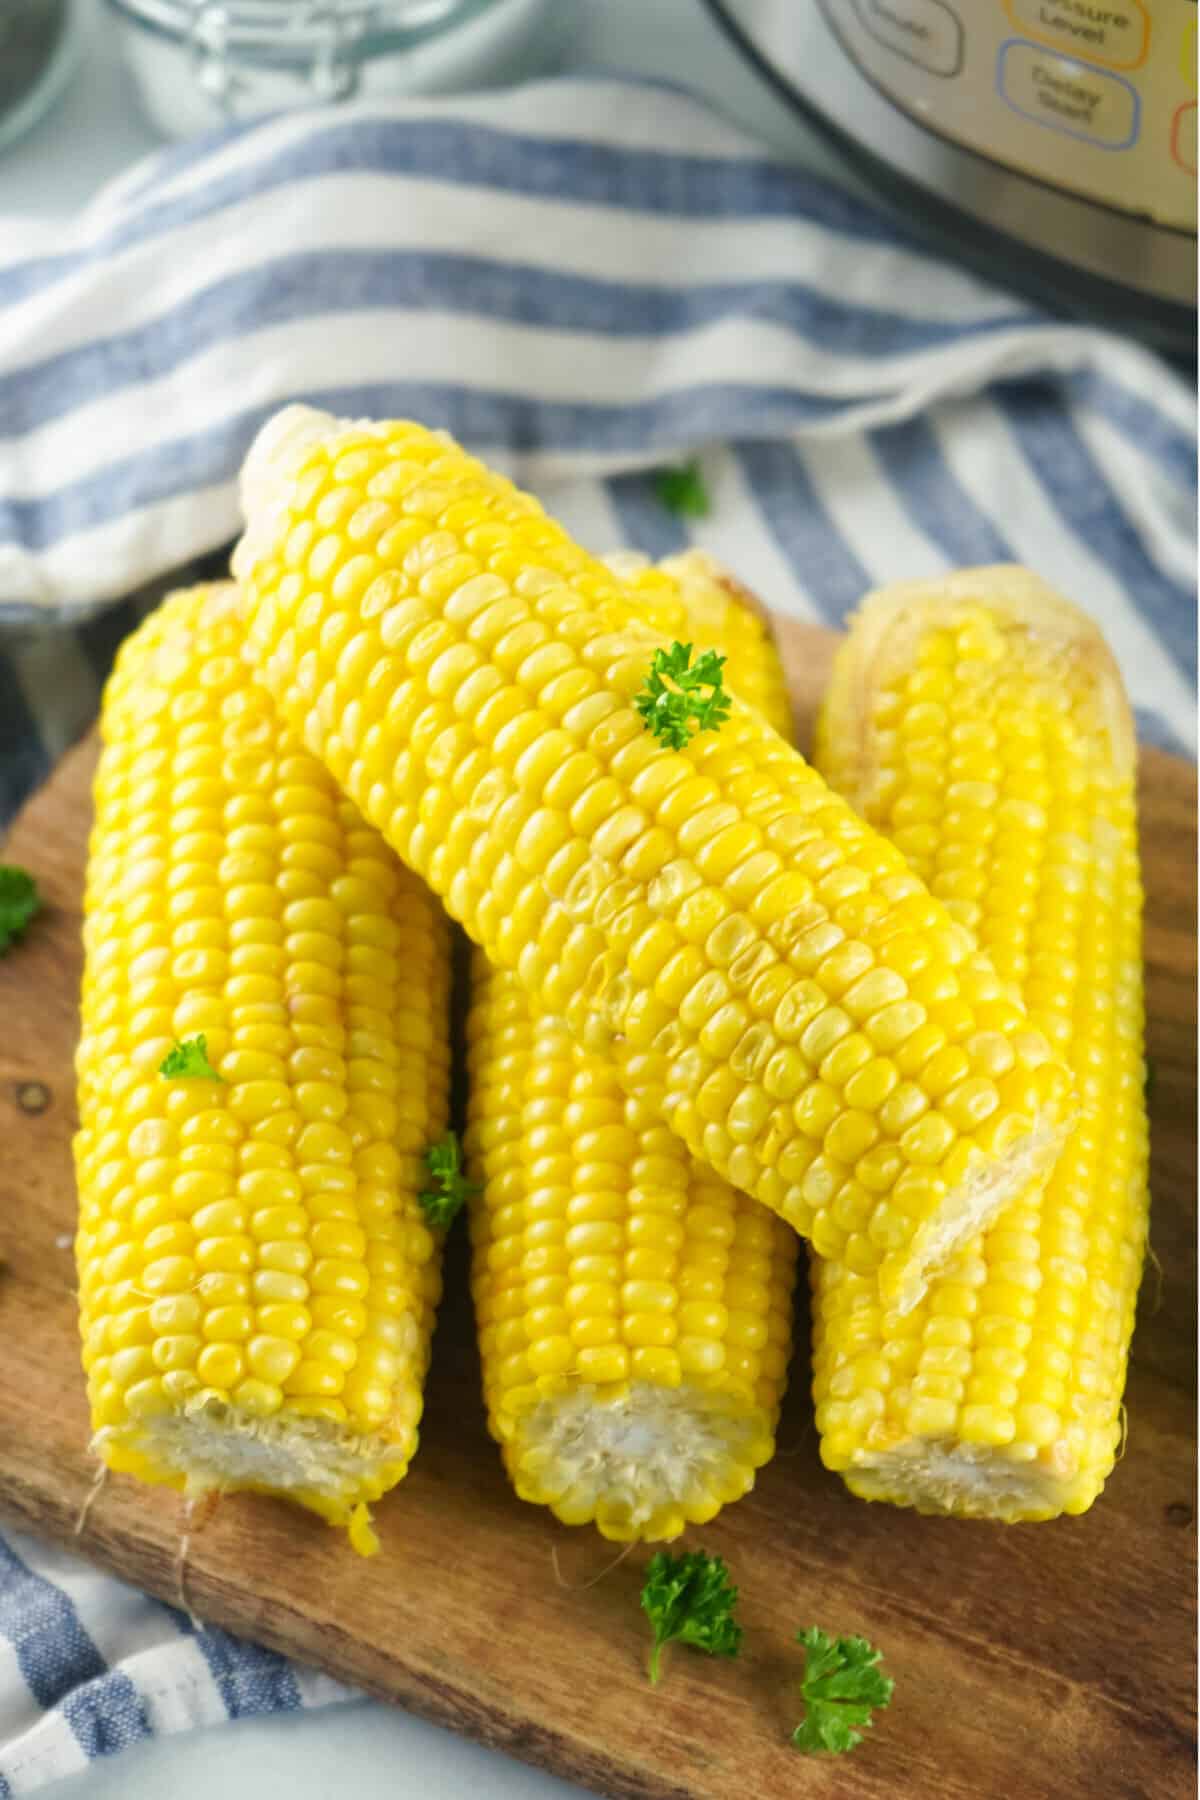 four cooked ears of corn on wood cutting board with parsley flakes. Blue striped napkin and instant pot in background